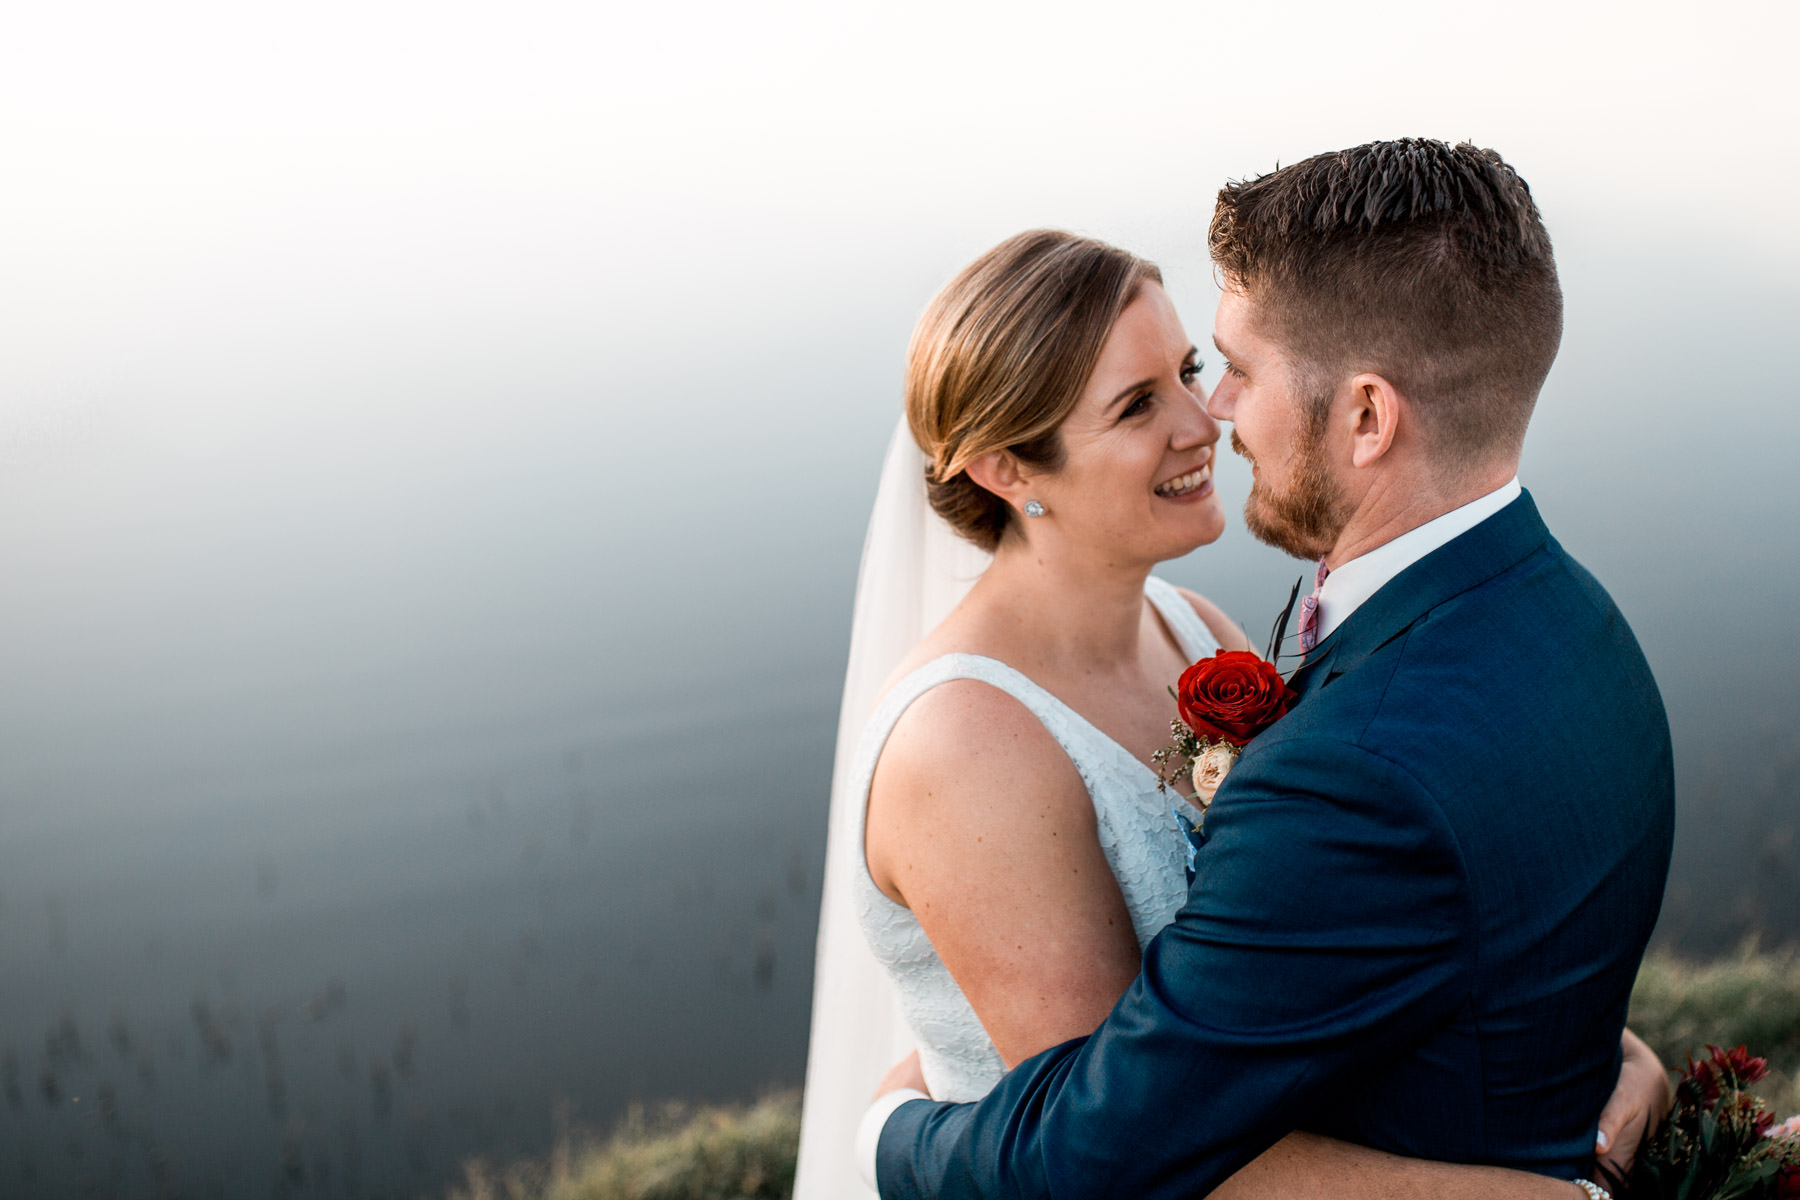 103Hunter Valley Wedding Photographers Bryce Noone Photography at Tocal Homestead Wedding Venue.jpg